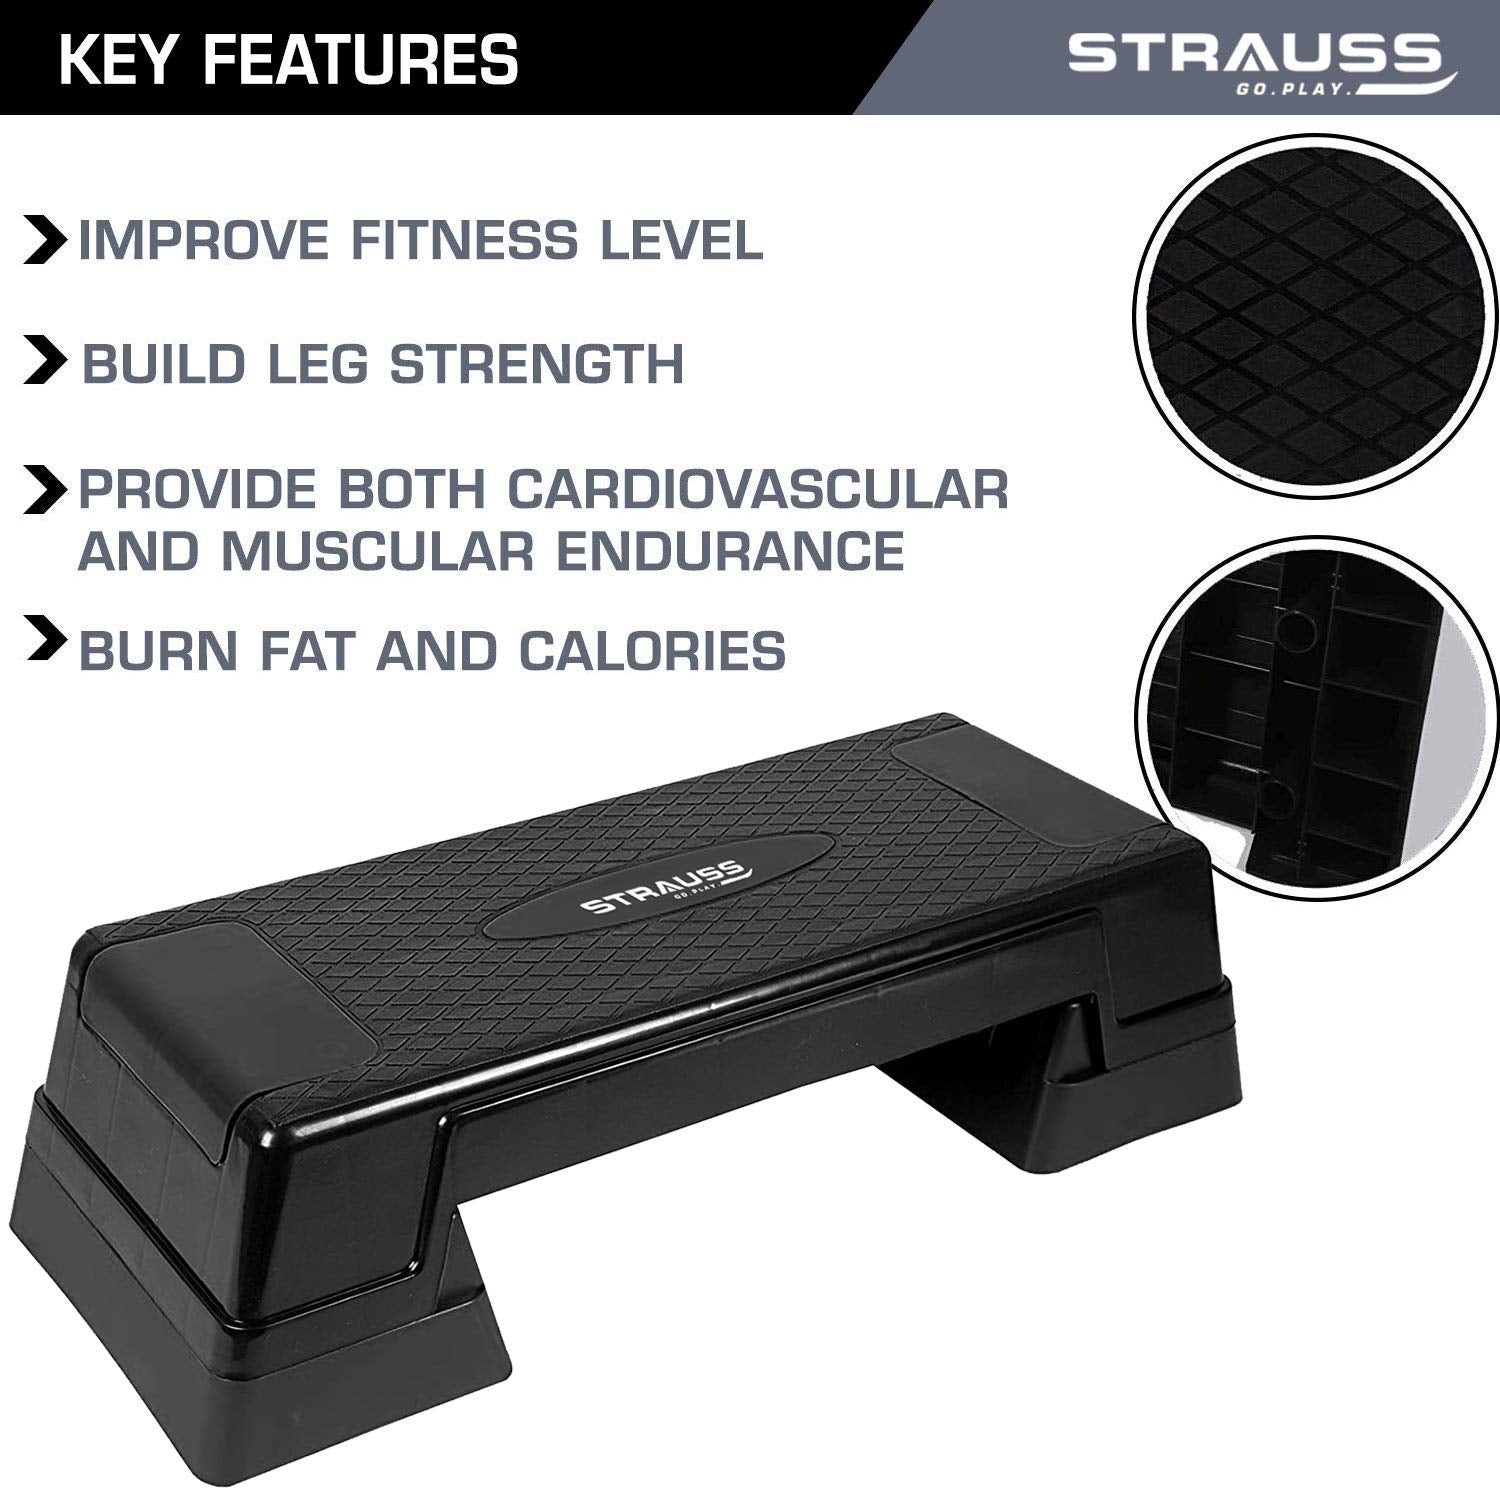 Strauss High Rise Aerobic Stepper | Two Height Level Adjustments - 6 inches and 8 inches | Slip-Resistant & Shock Absorbing Platform for Extra-Durability - Supports Upto 200 KG, (Black)